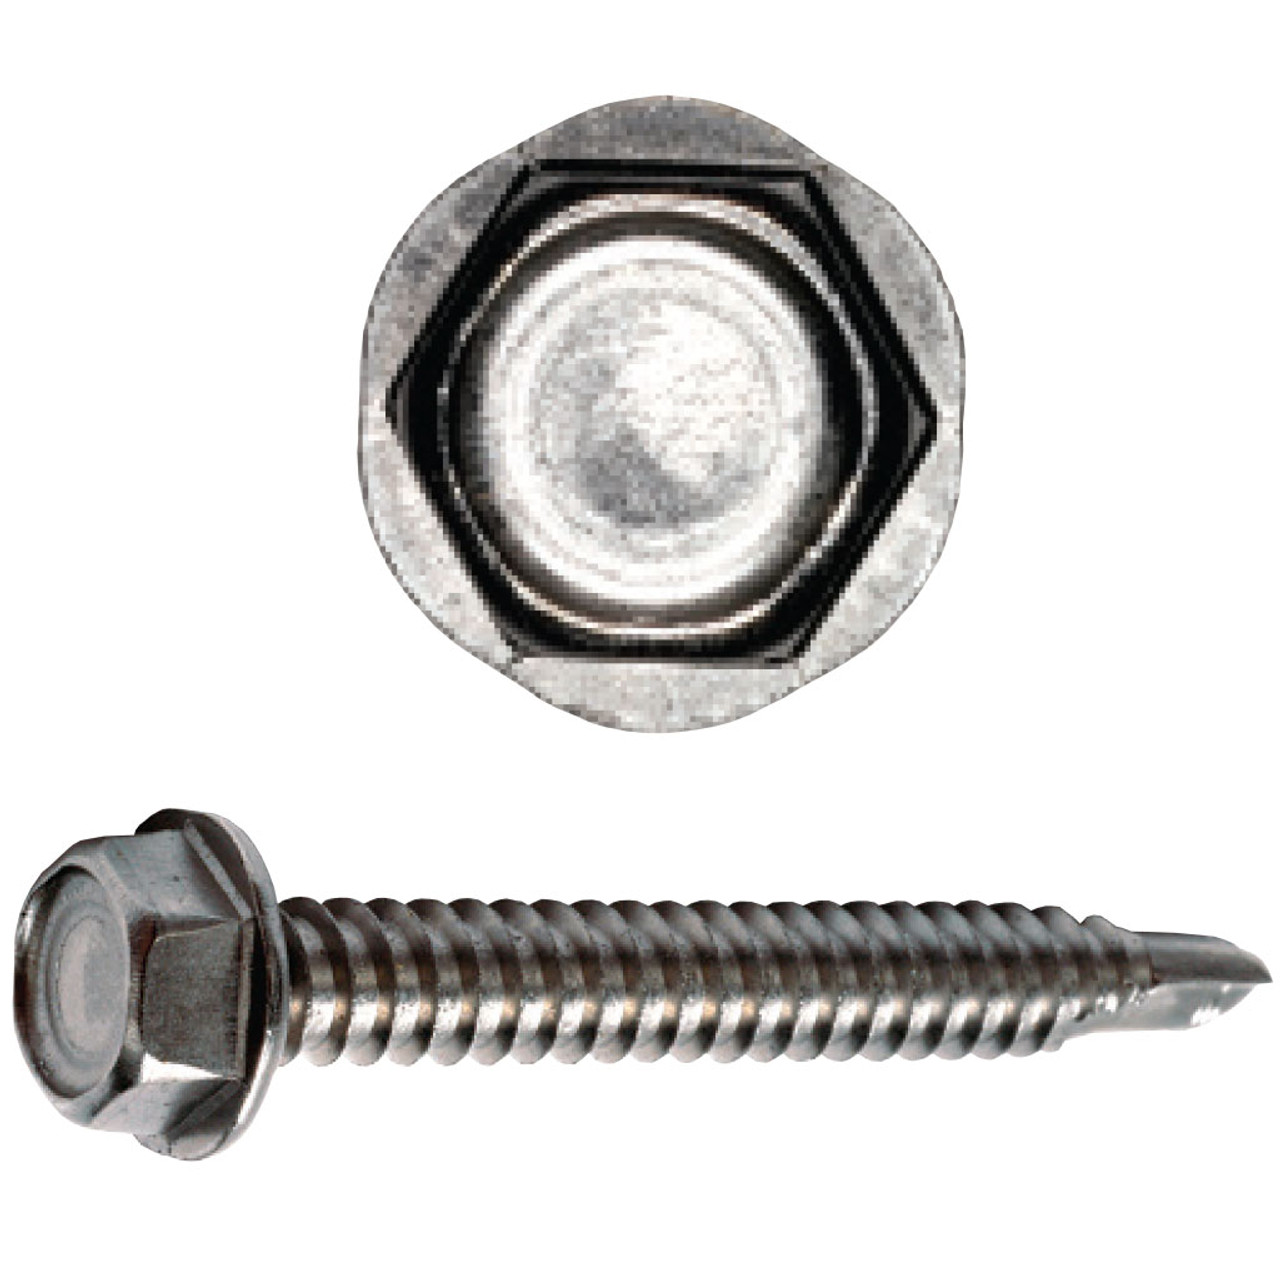 #14 x 1-1/4" Hex Washer Head Self Drilling Screws Stainless Steel Metal Qty25